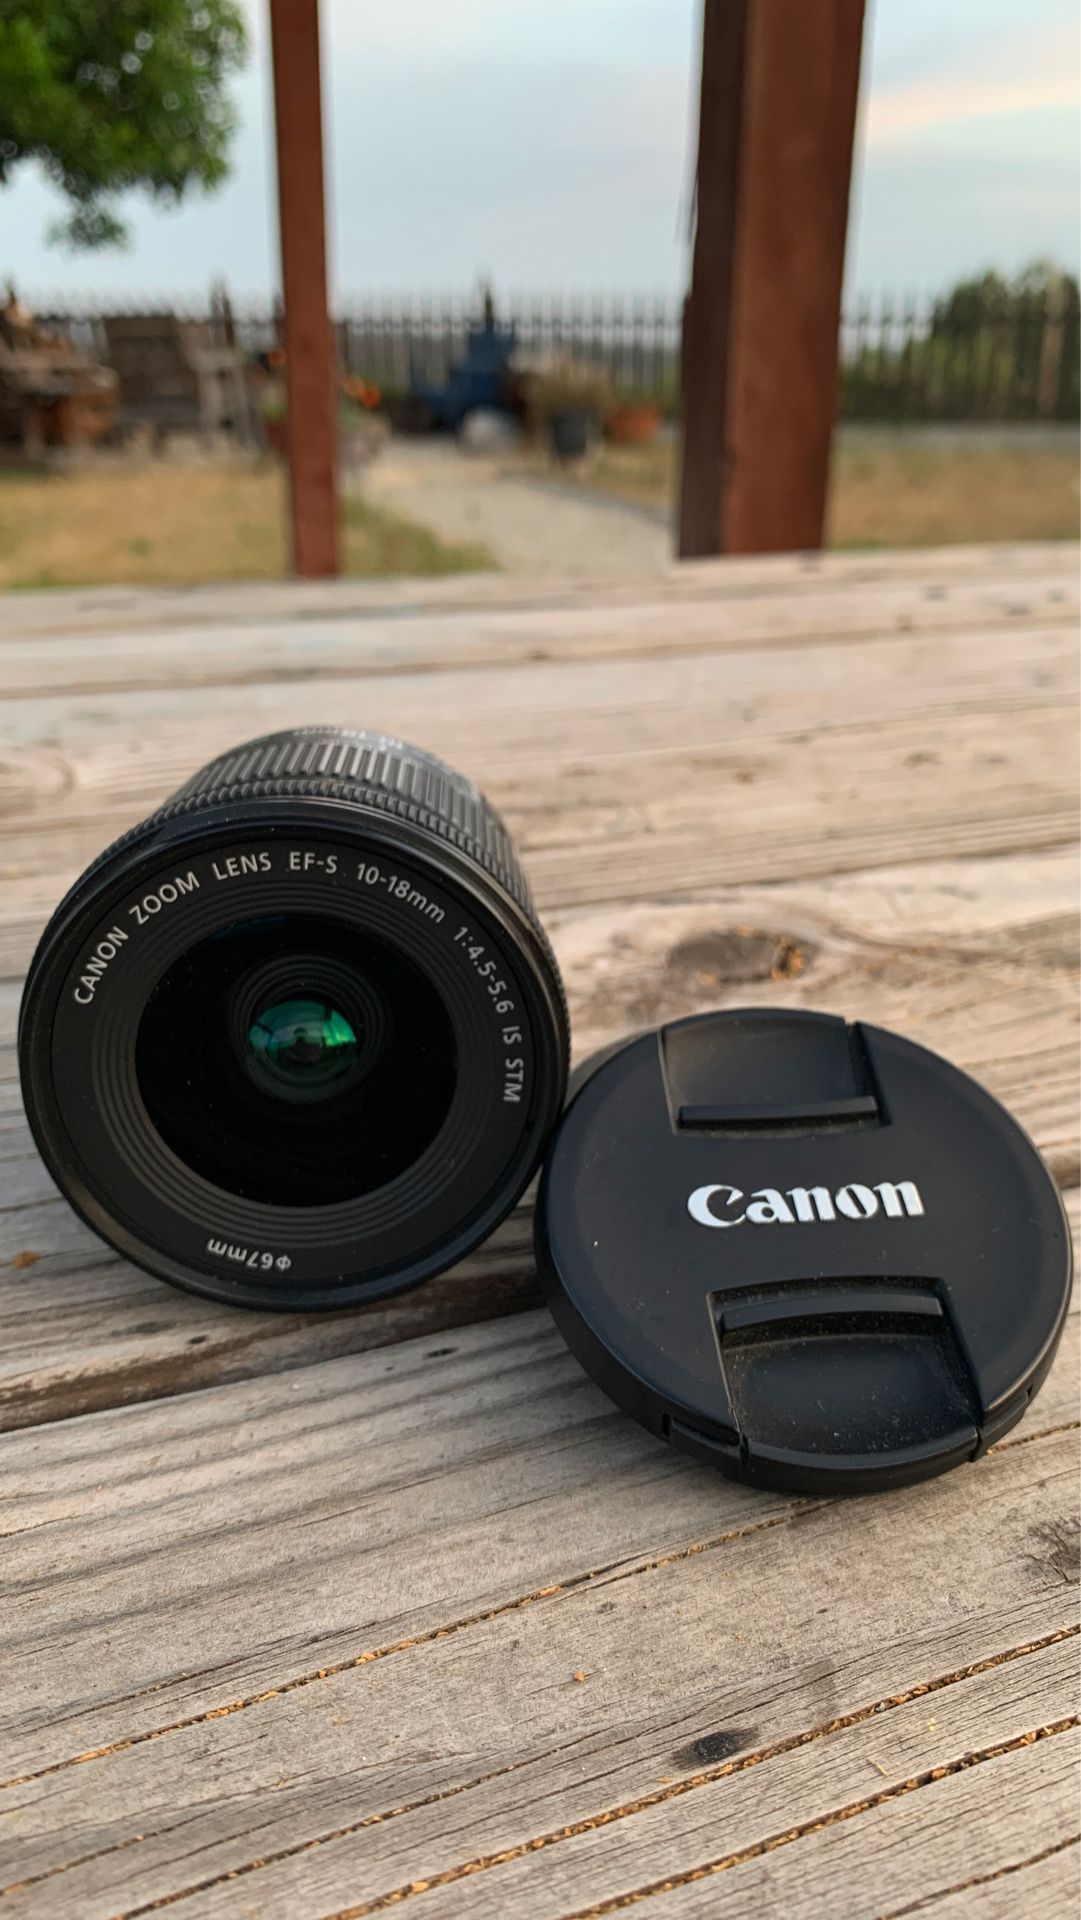 Canon 10-18mm Ef-S Lens with Image Stabilizer